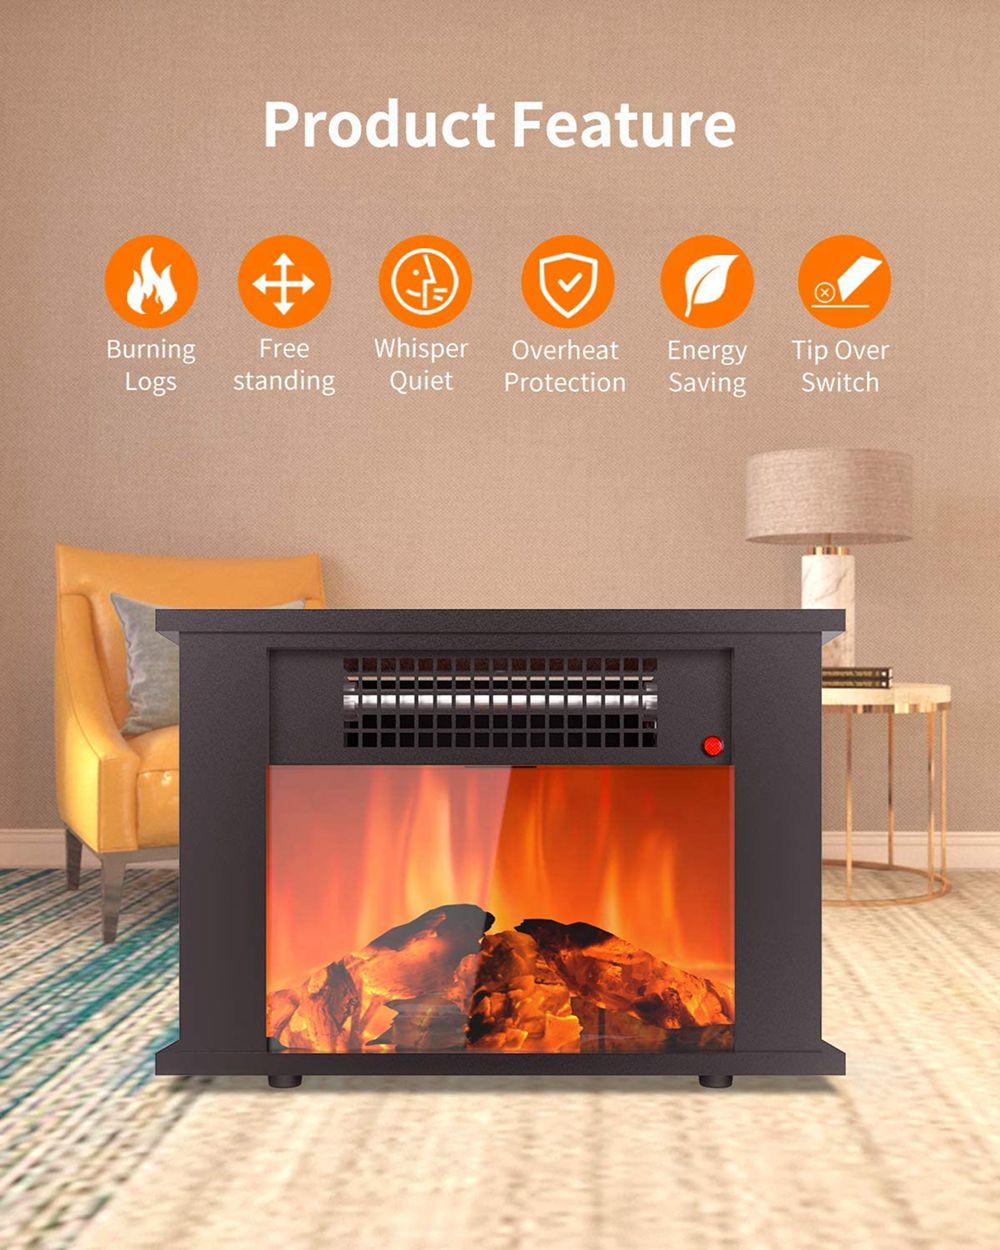 Portable Mini Tabletop Electric Fireplace Space Heater With Flame Effect And Overheating (1)